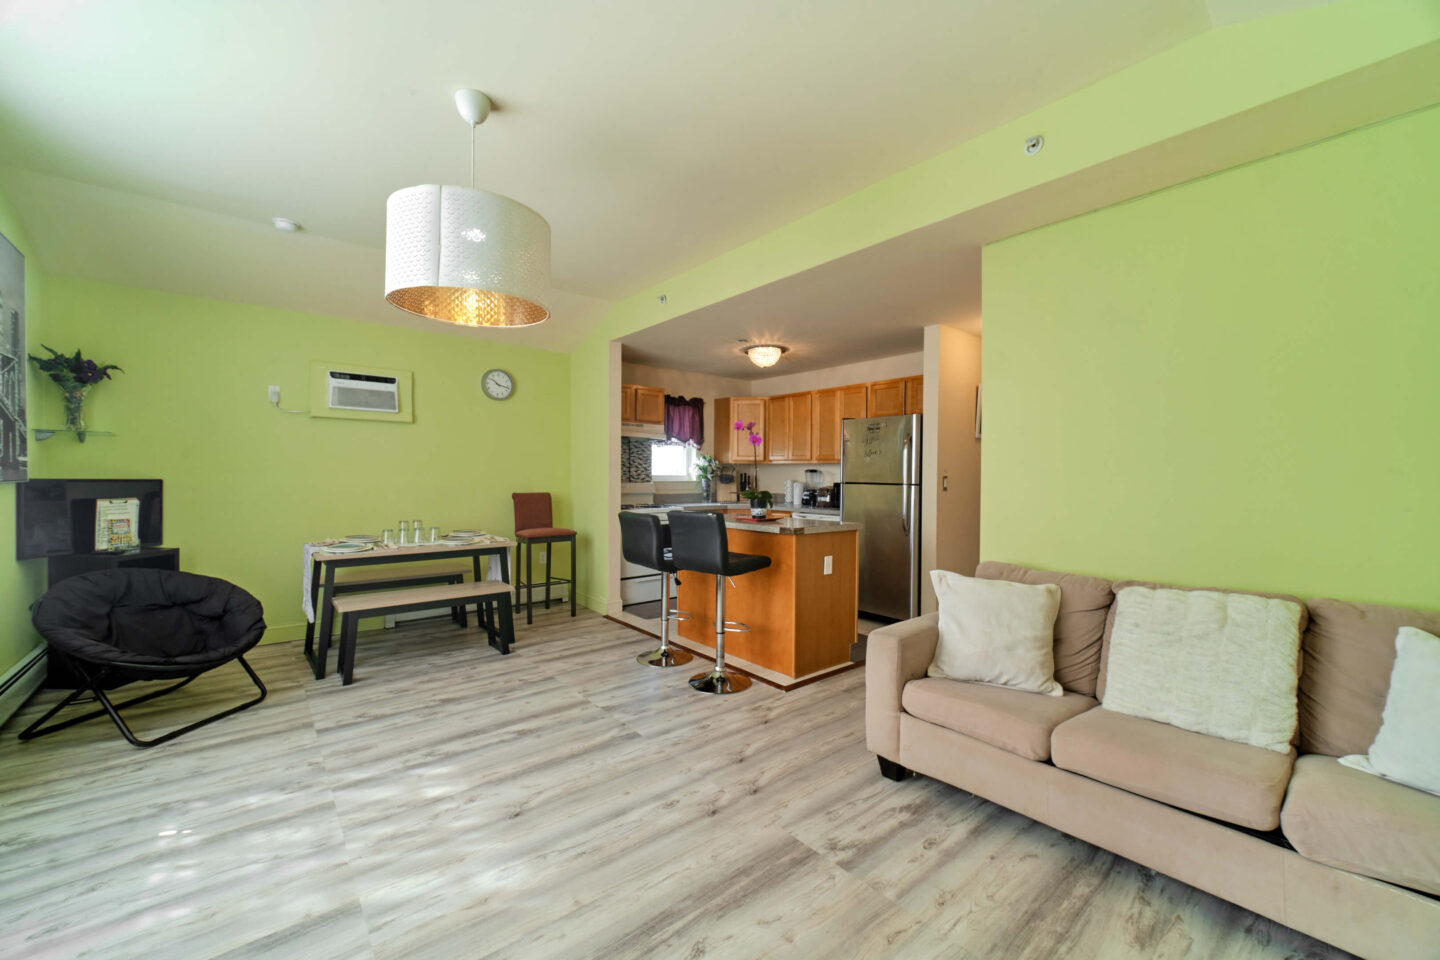 101 Dolphin Ct, Bronx, NY 10473 - Real Estate Photography, AirBnB Photography